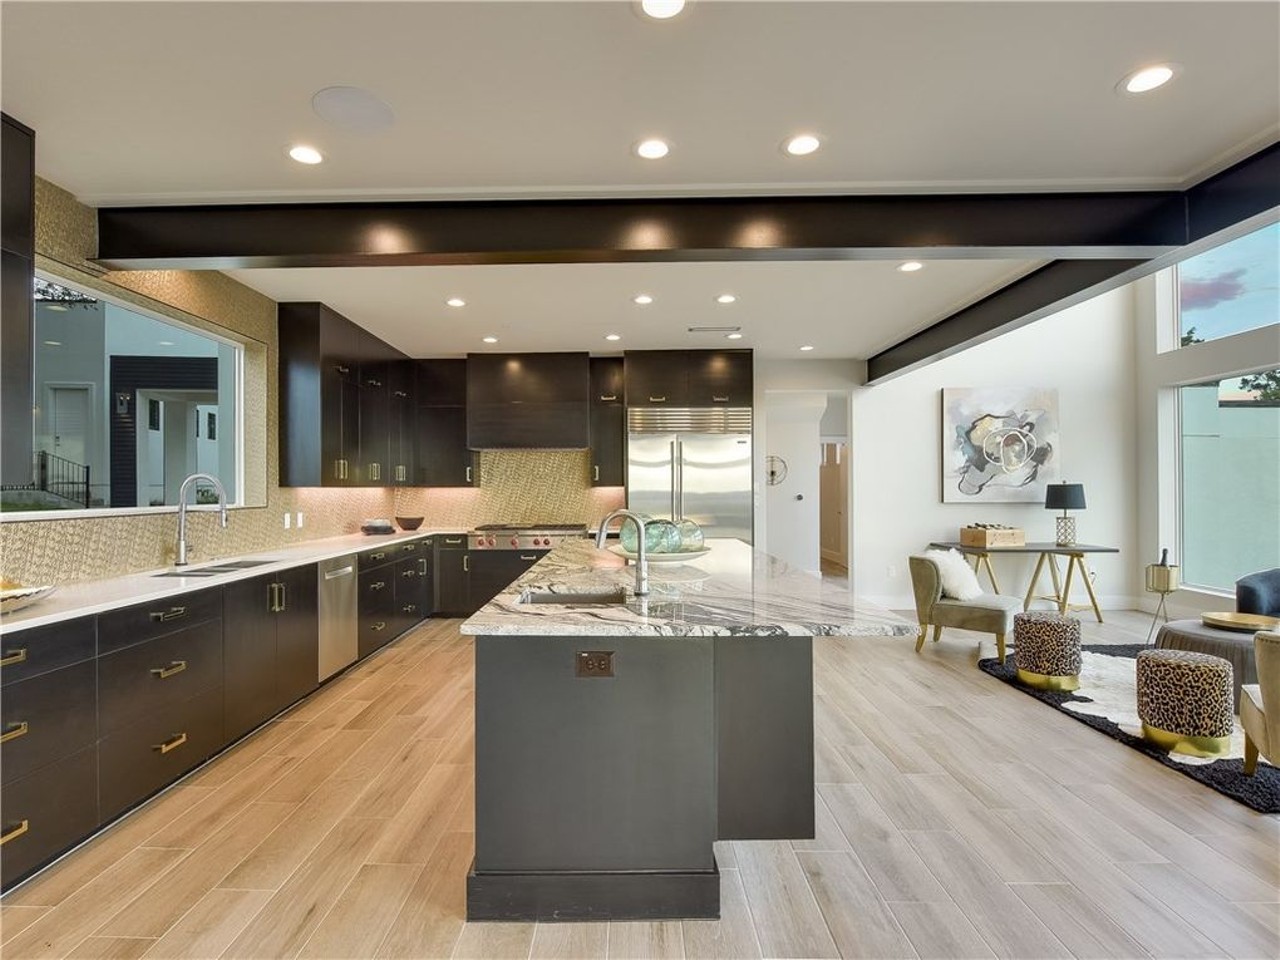 The home's kitchen is breathtaking.